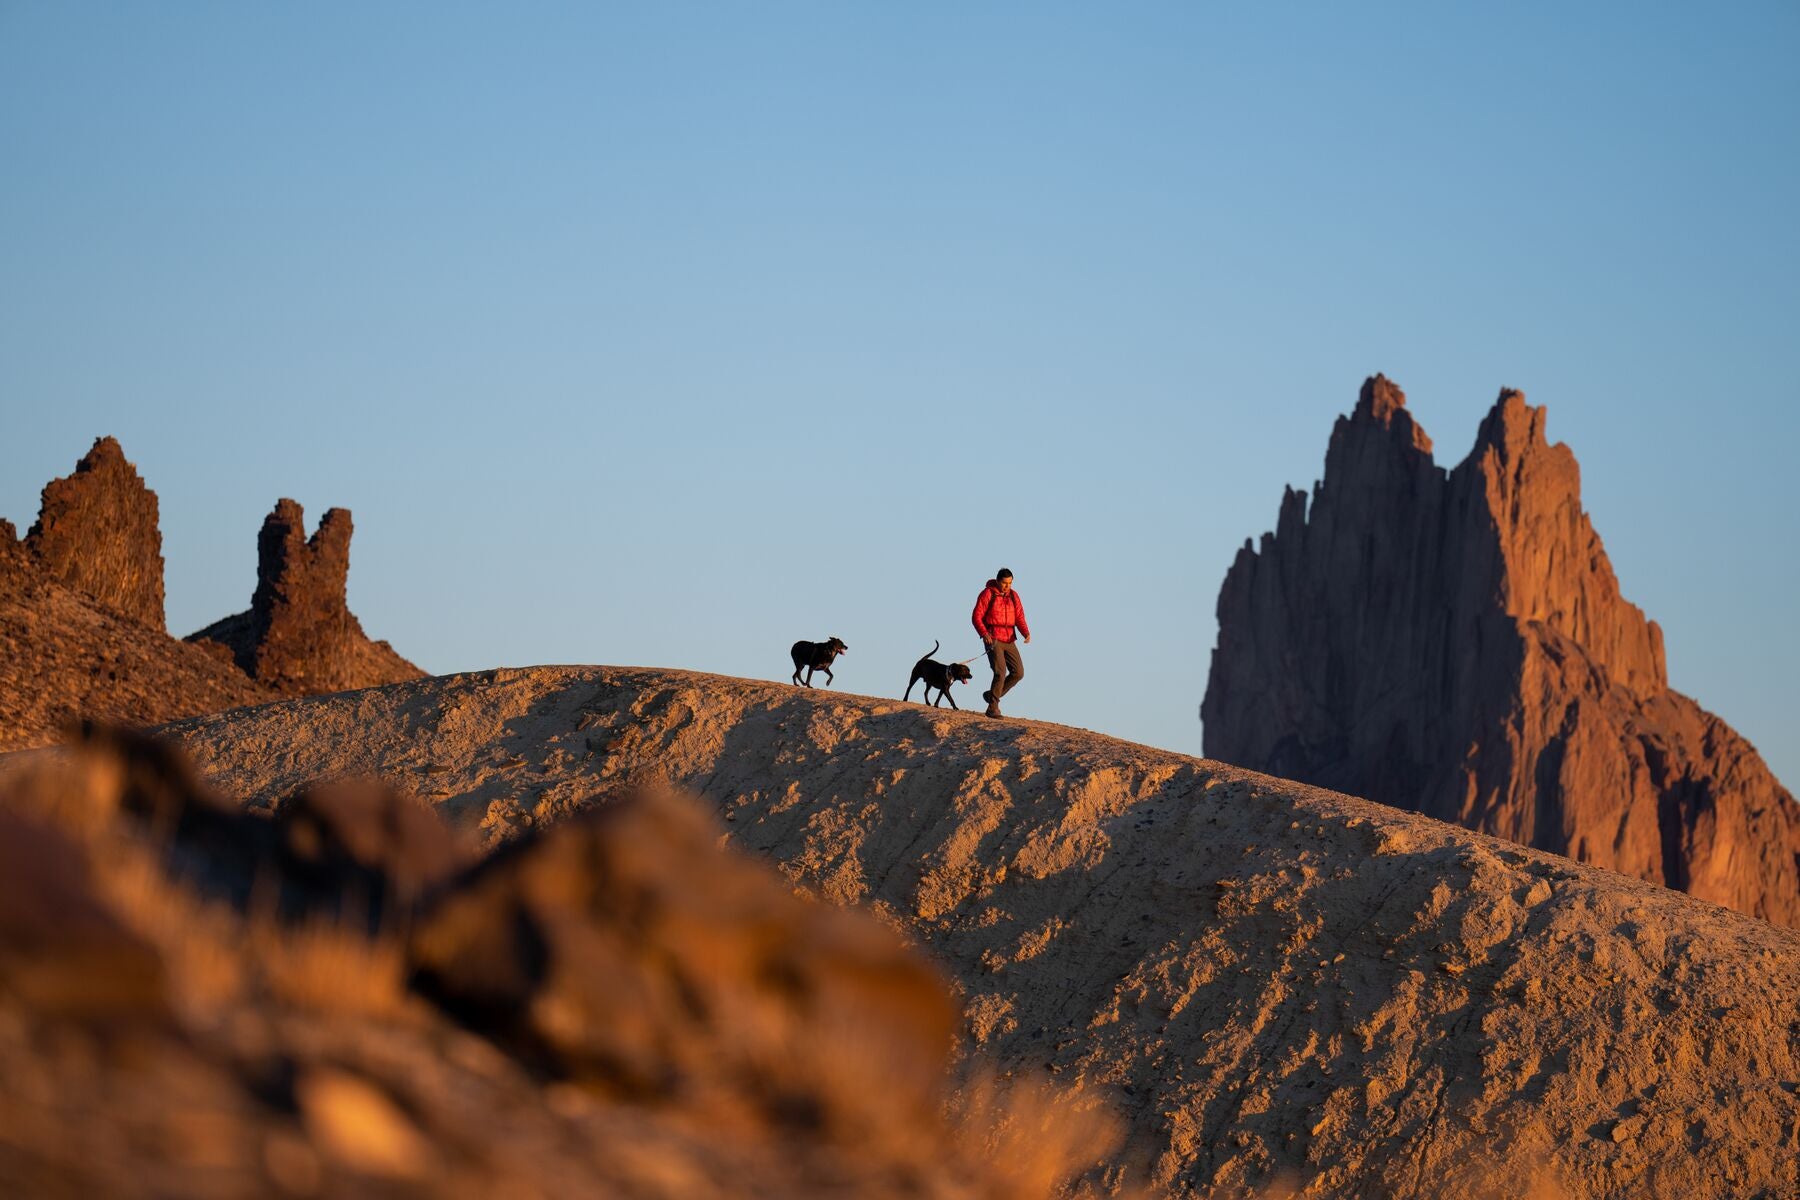 Vernan Kee hikes with two of his dogs.